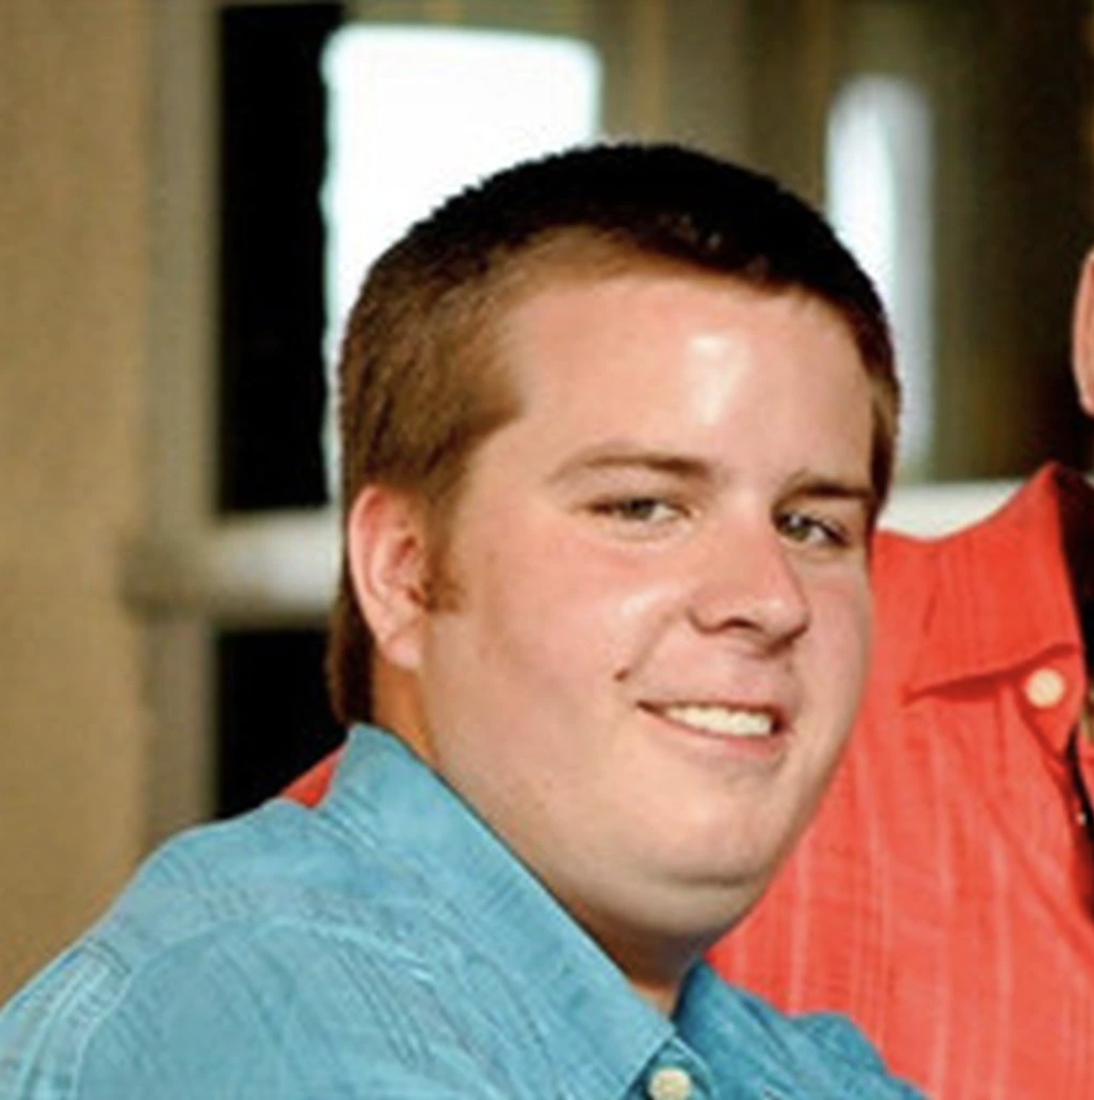 Photo of Taylor Coffman, a young man with auburn buzz-cut hair and a bight blue collared shirt